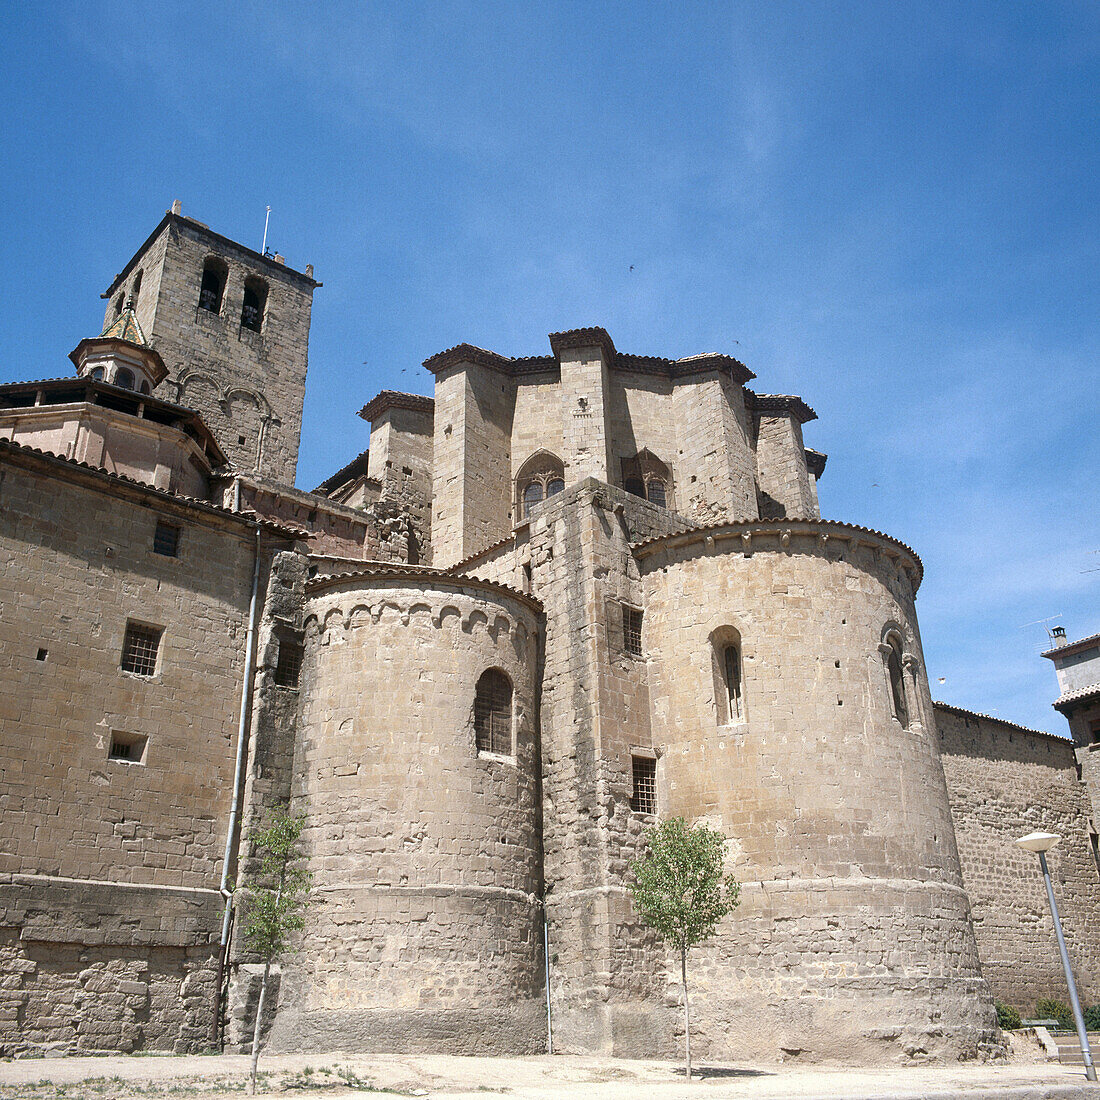 Cathedral (12th century). Solsona. Lleida province. Spain